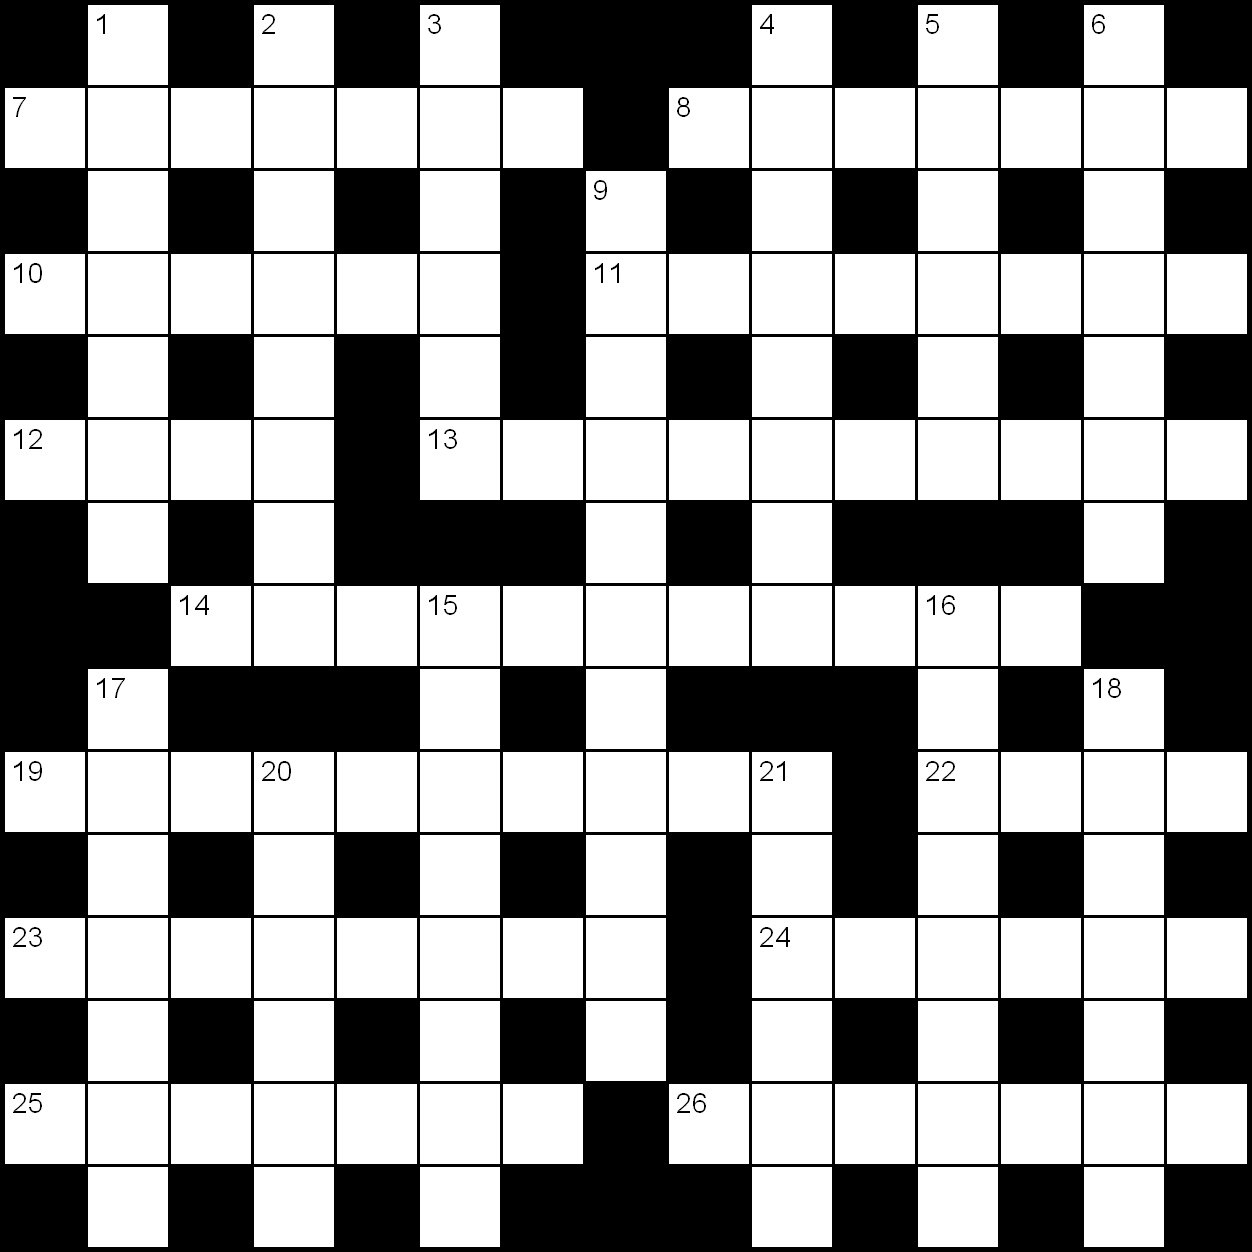 An image of a 15 x 15 black and white crossword grid, with no answers filled in.